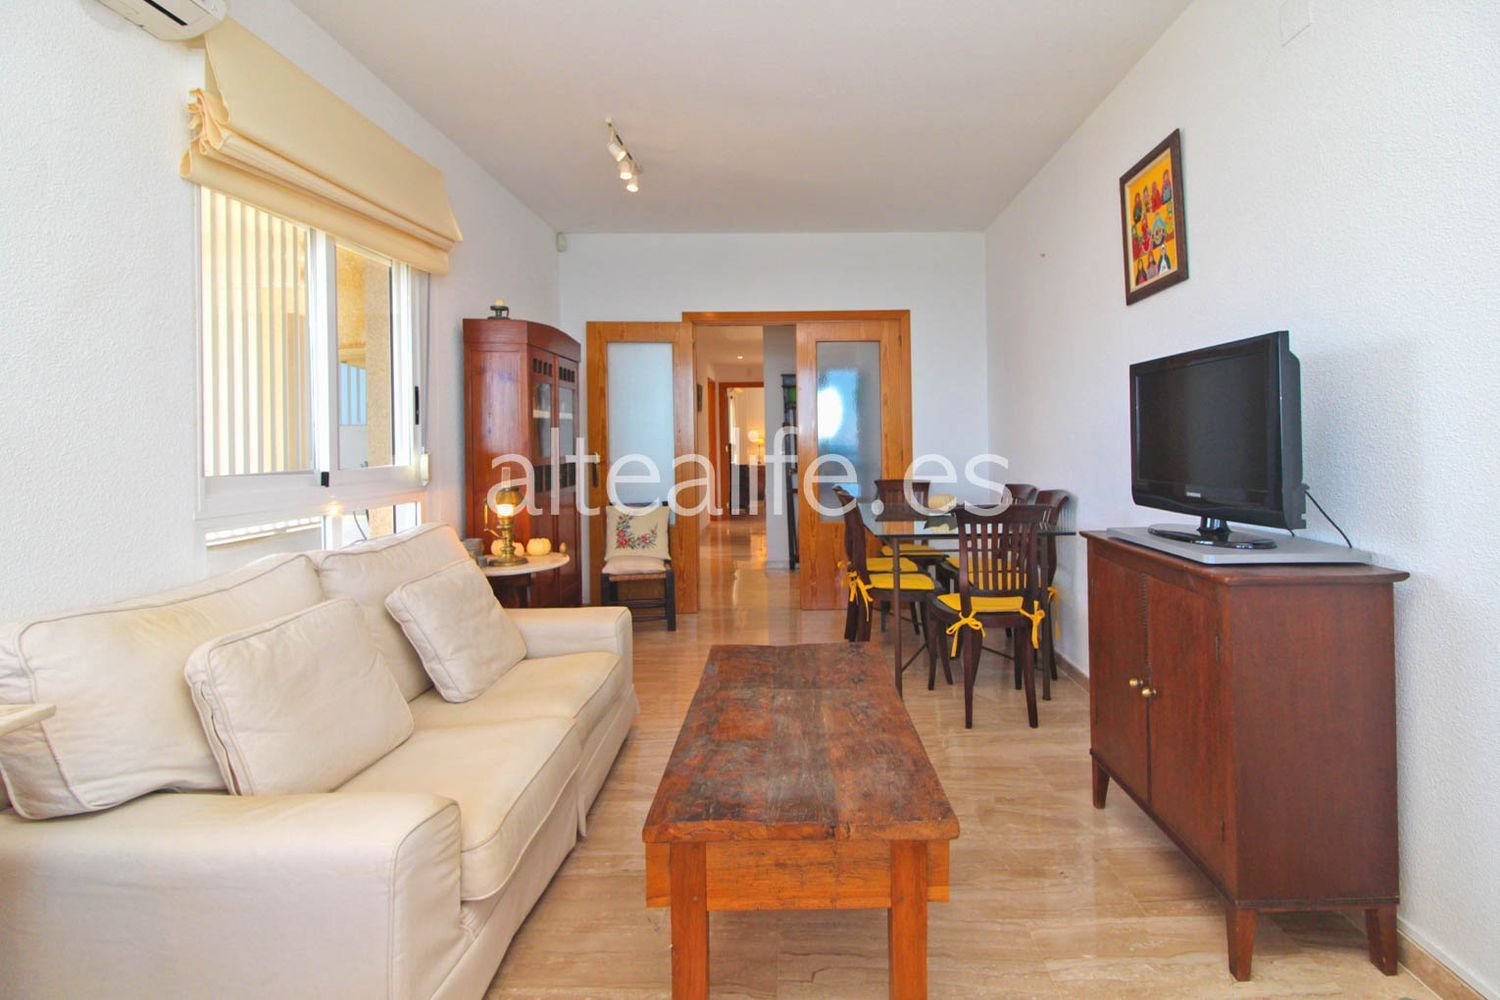 Apartment for sale on the seafront in La Olla, in Altea